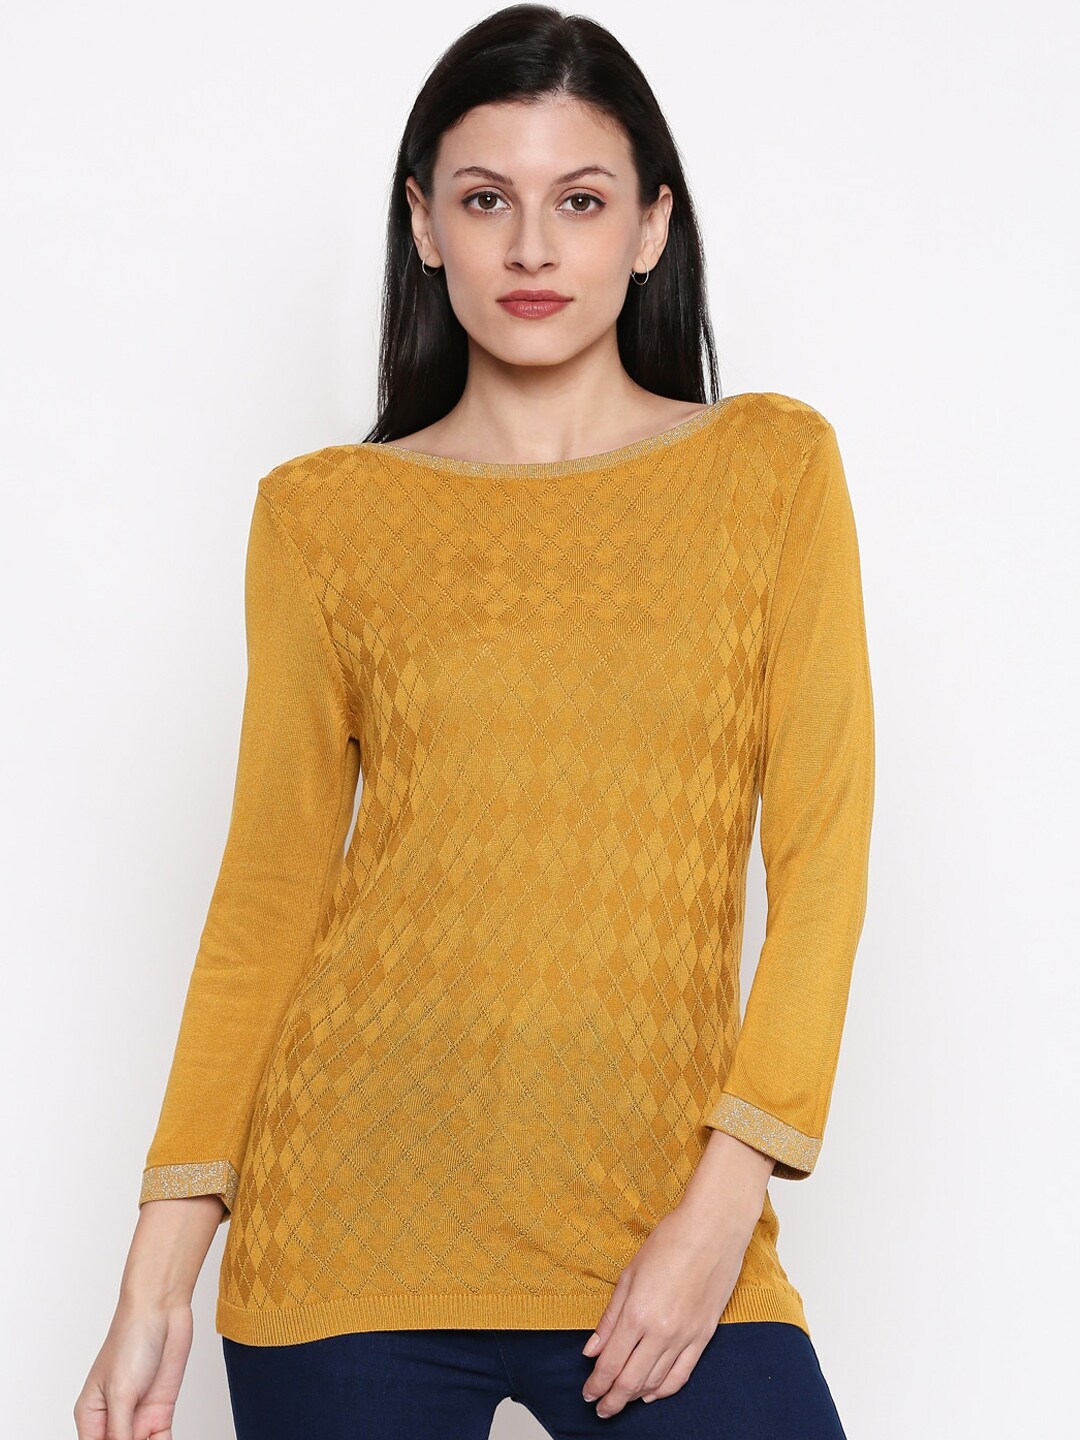 Annabelle by Pantaloons Women Mustard Yellow Self Design Pullover Sweater Price in India